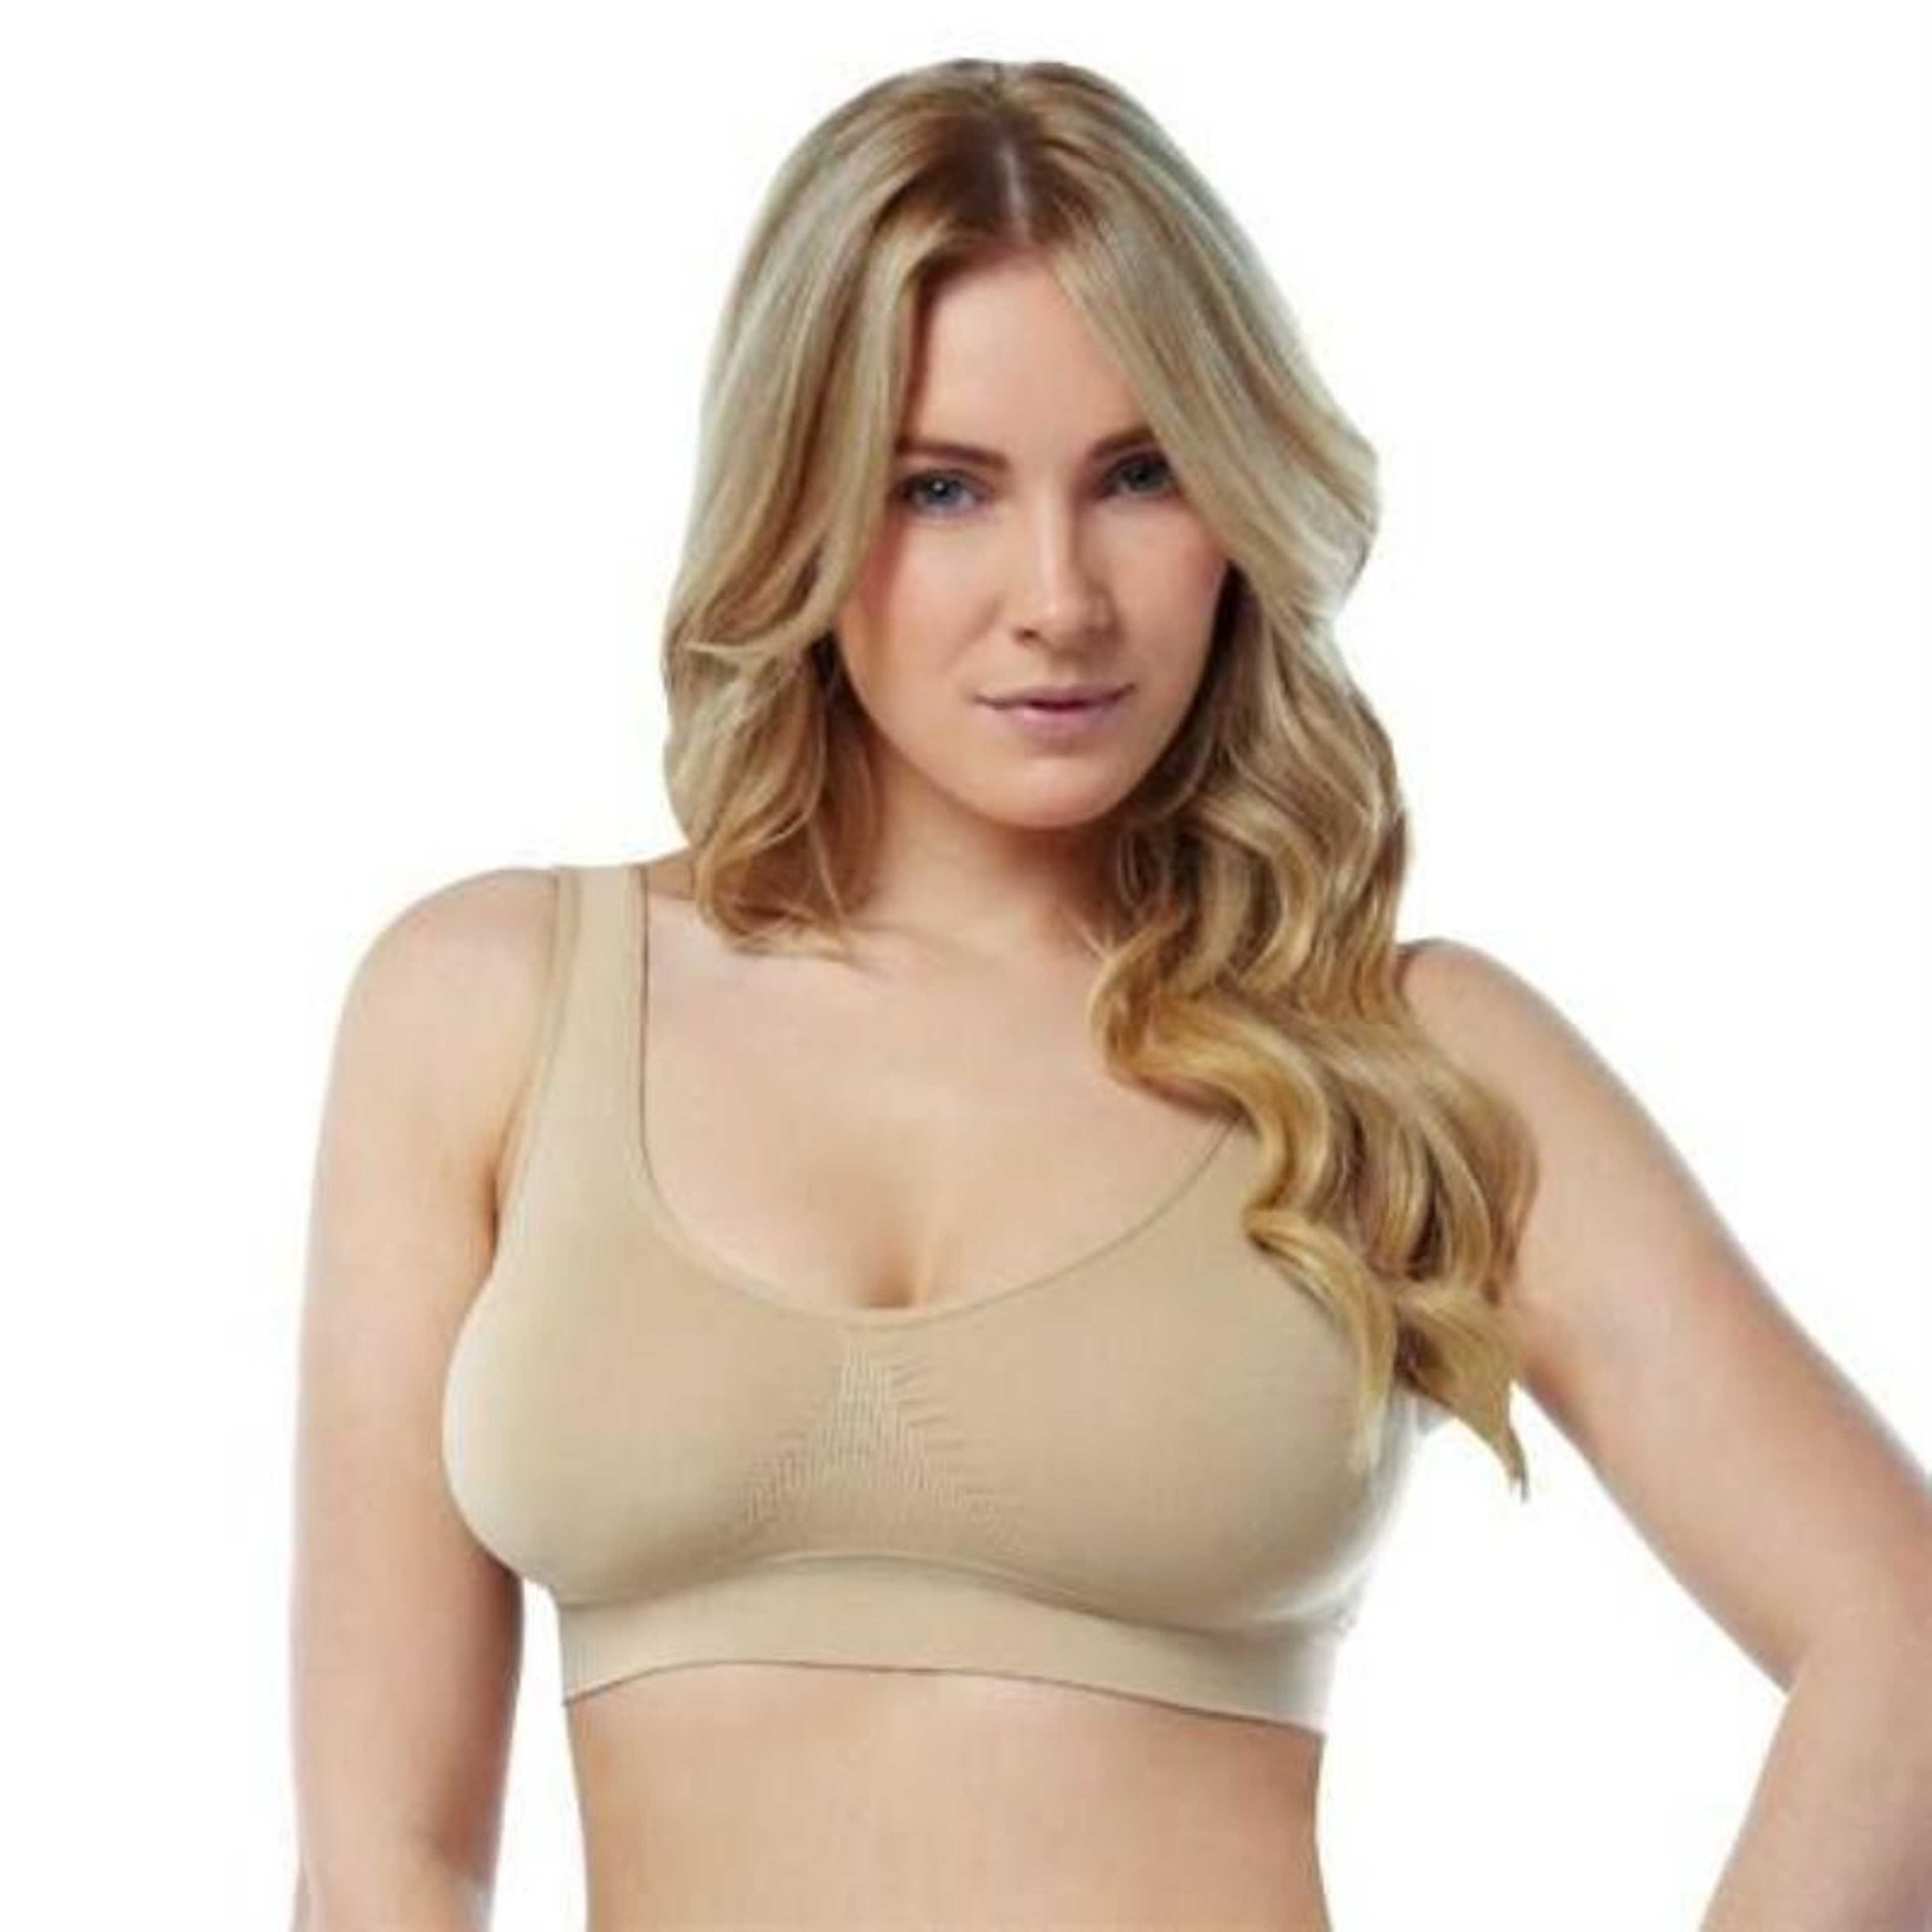 Adjustable Air Bra - Brazzer for Women and Girls - No Straps,No Clips,No Wires,No Pain